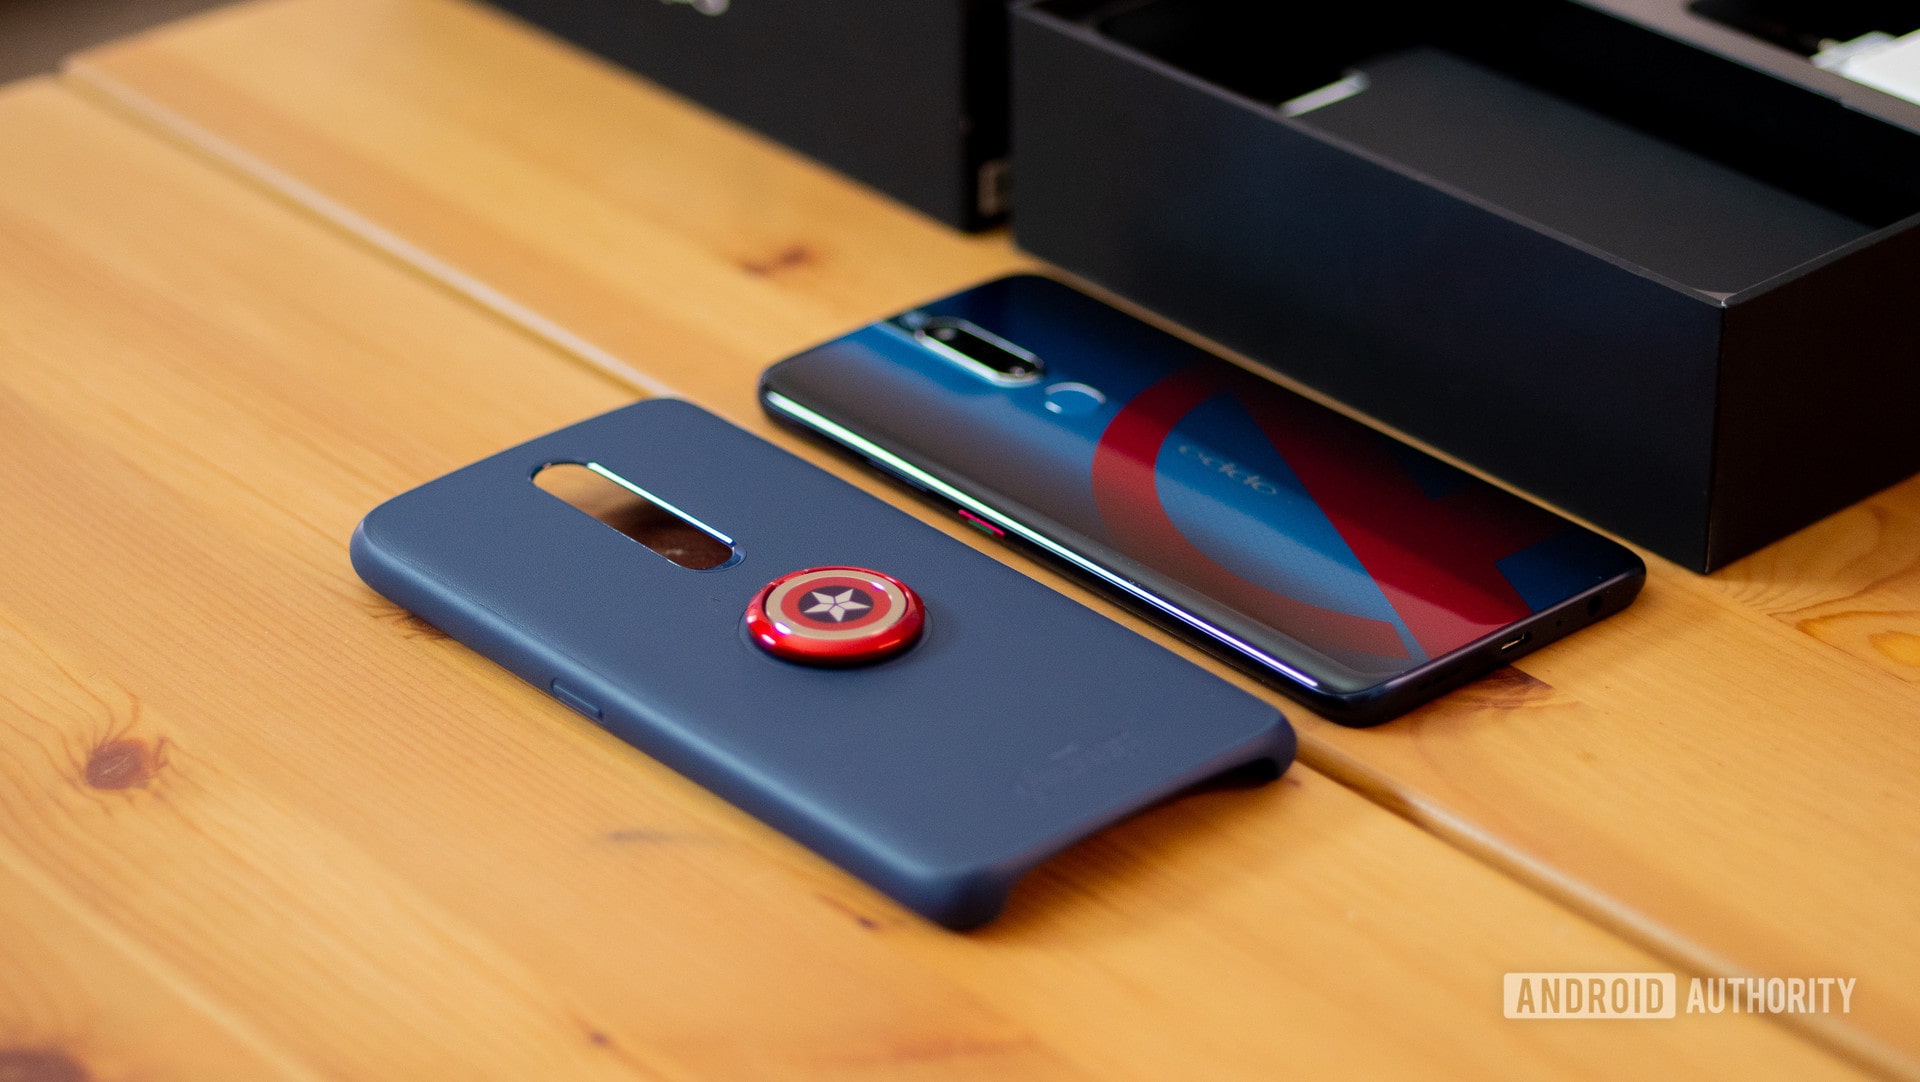 Oppo F11 Pro Avengers Endgame Edition case and phone